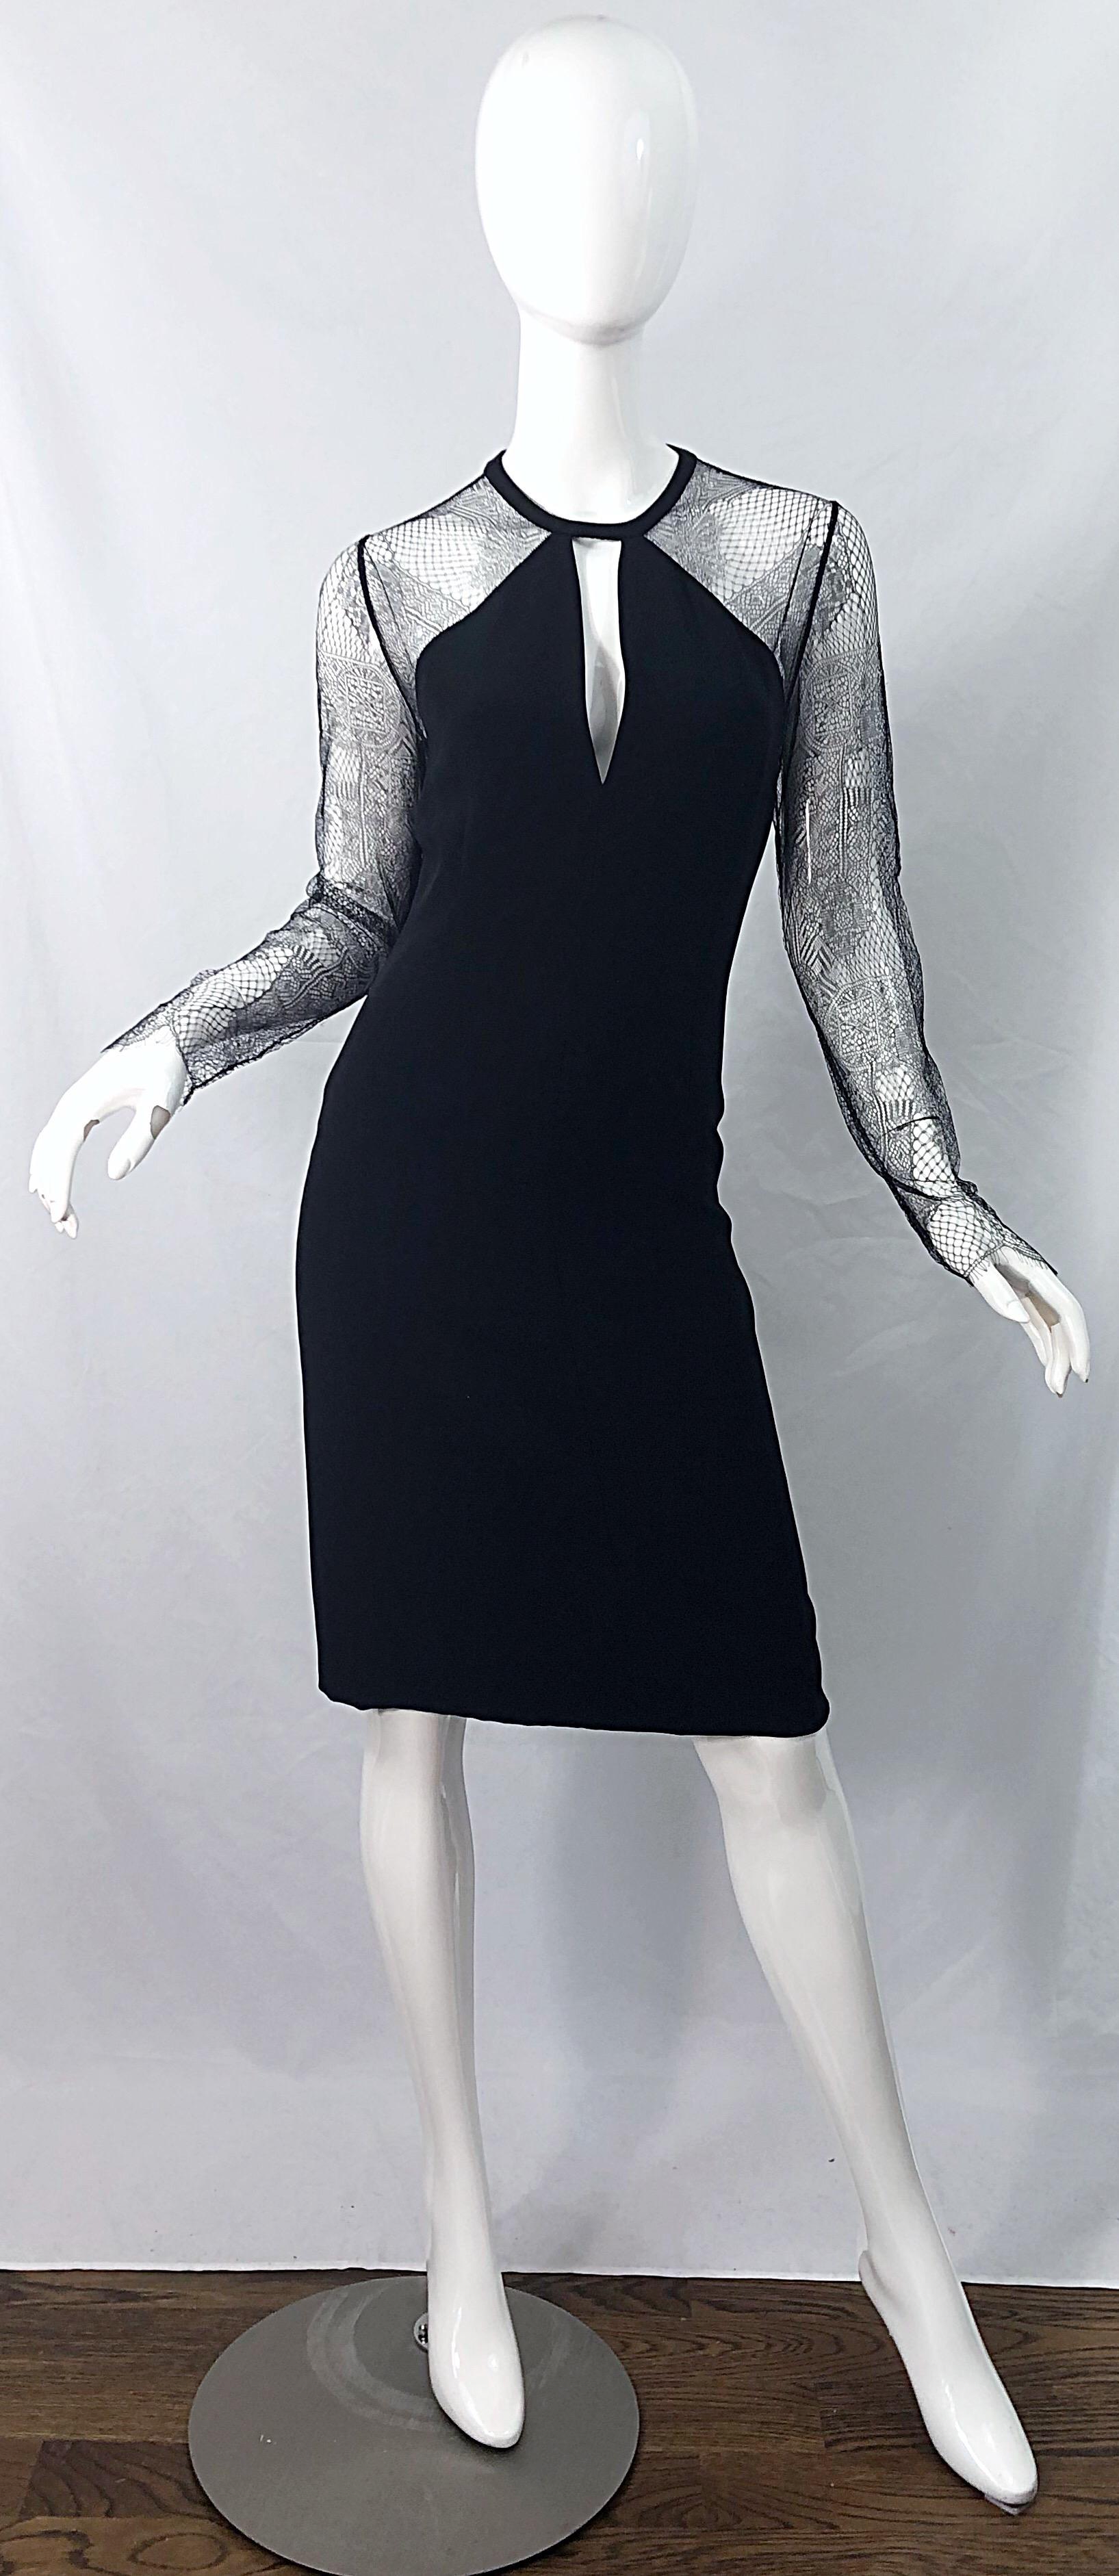 Beautiful and classic vintage early 1990s BILL BLASS black silk and lace cut-out dress ! This is not just your ordinary everyday black dress--this one is very special! Features sheer black lace sleeves and back.
Peek-a-boo cut-out at center neck.